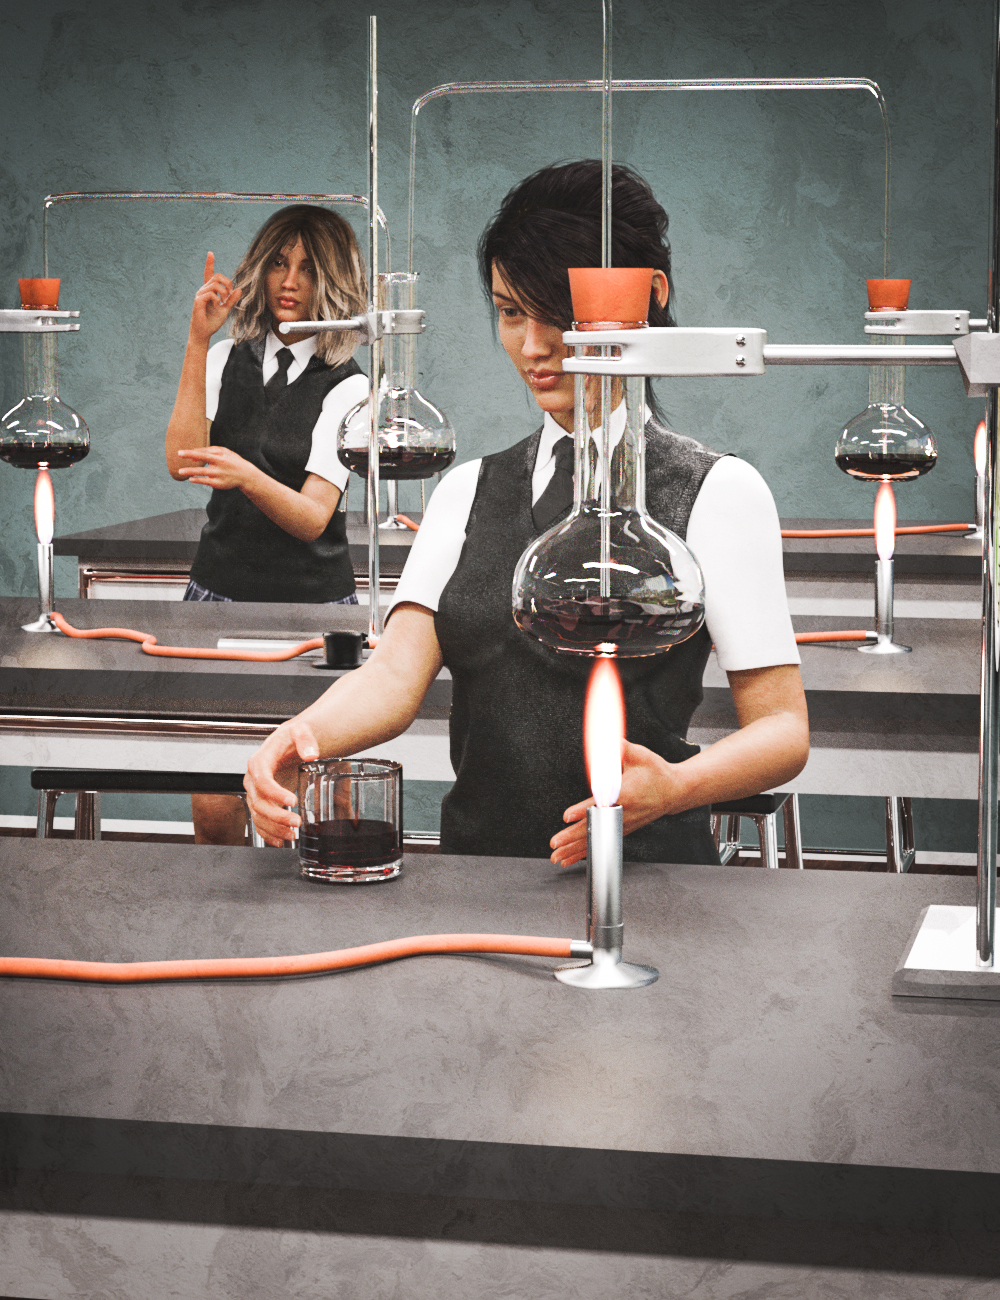 Chemistry Classroom by: Serum, 3D Models by Daz 3D